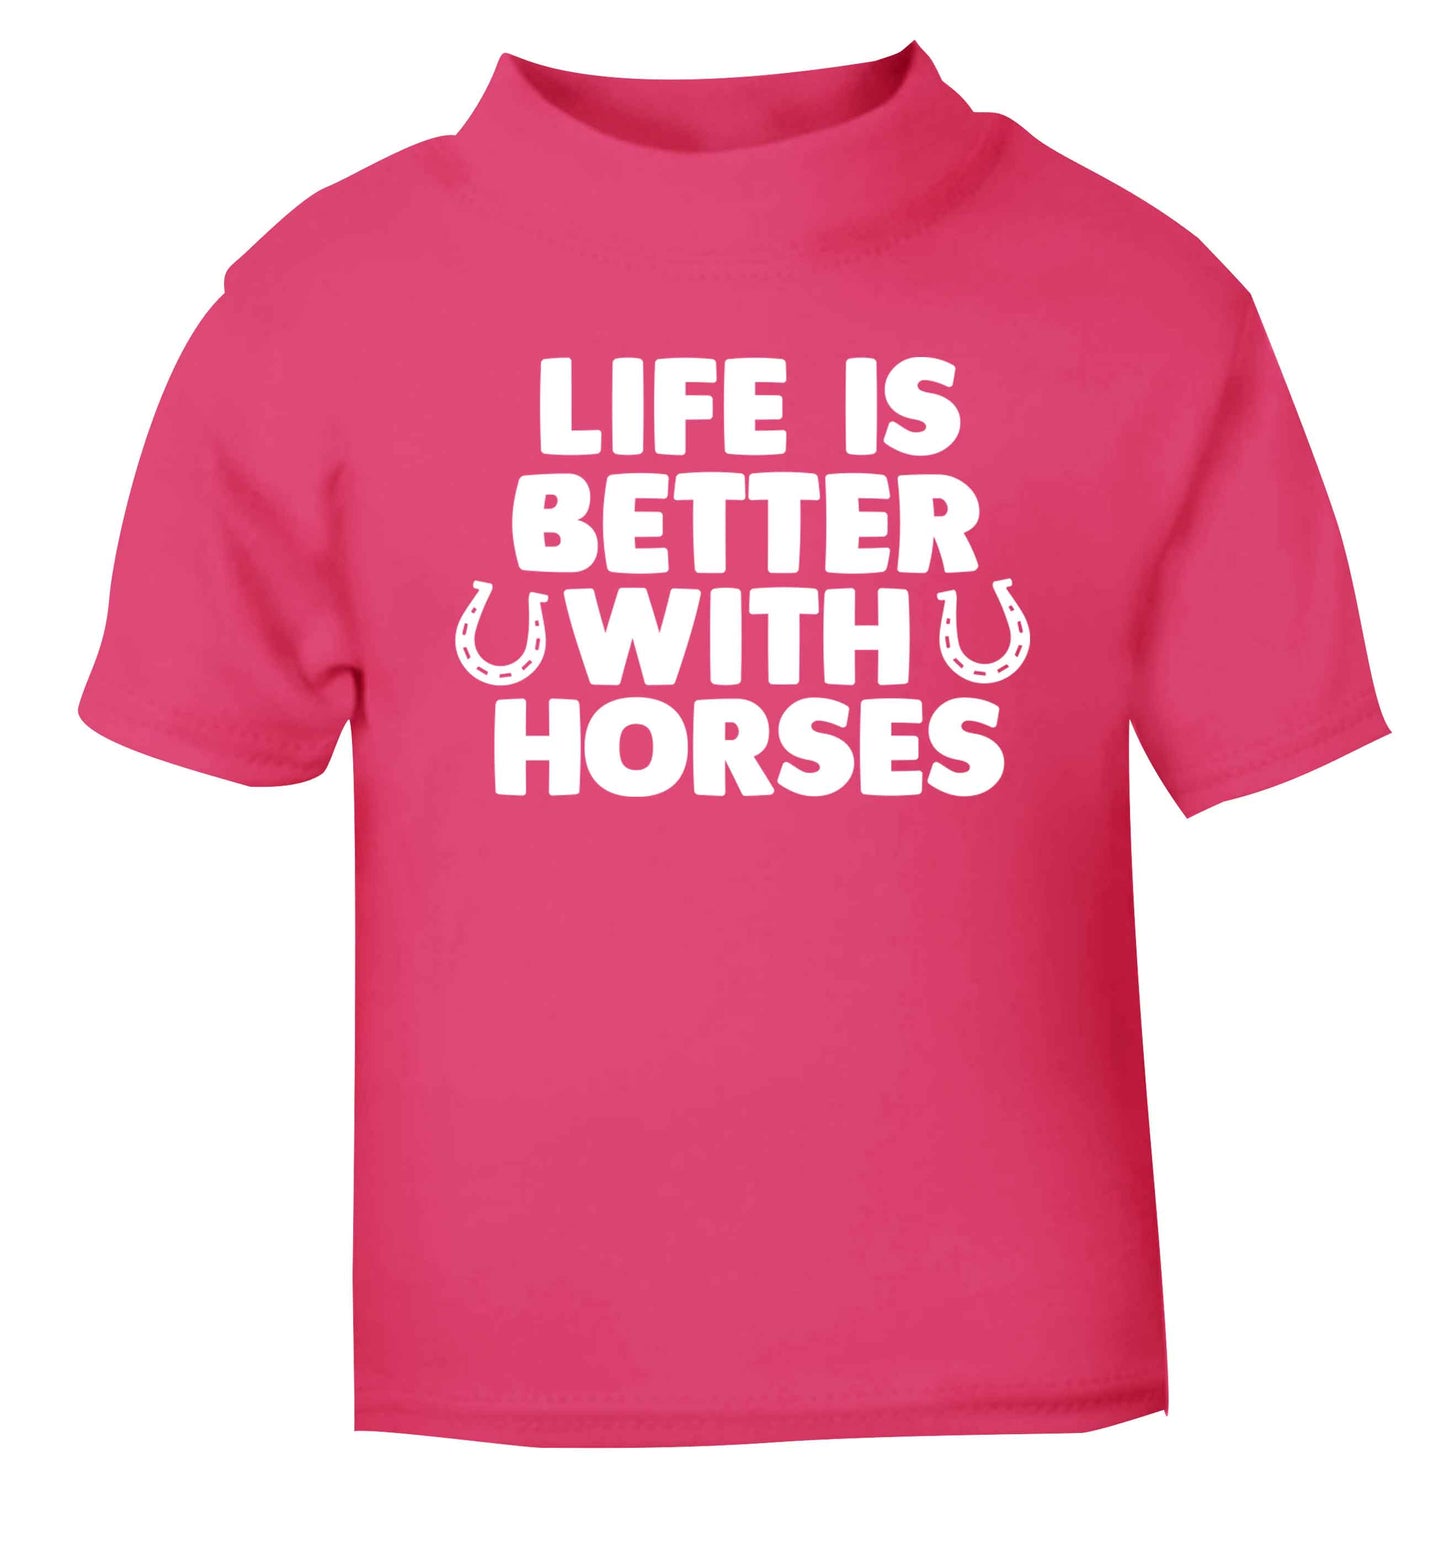 Life is better with horses pink baby toddler Tshirt 2 Years